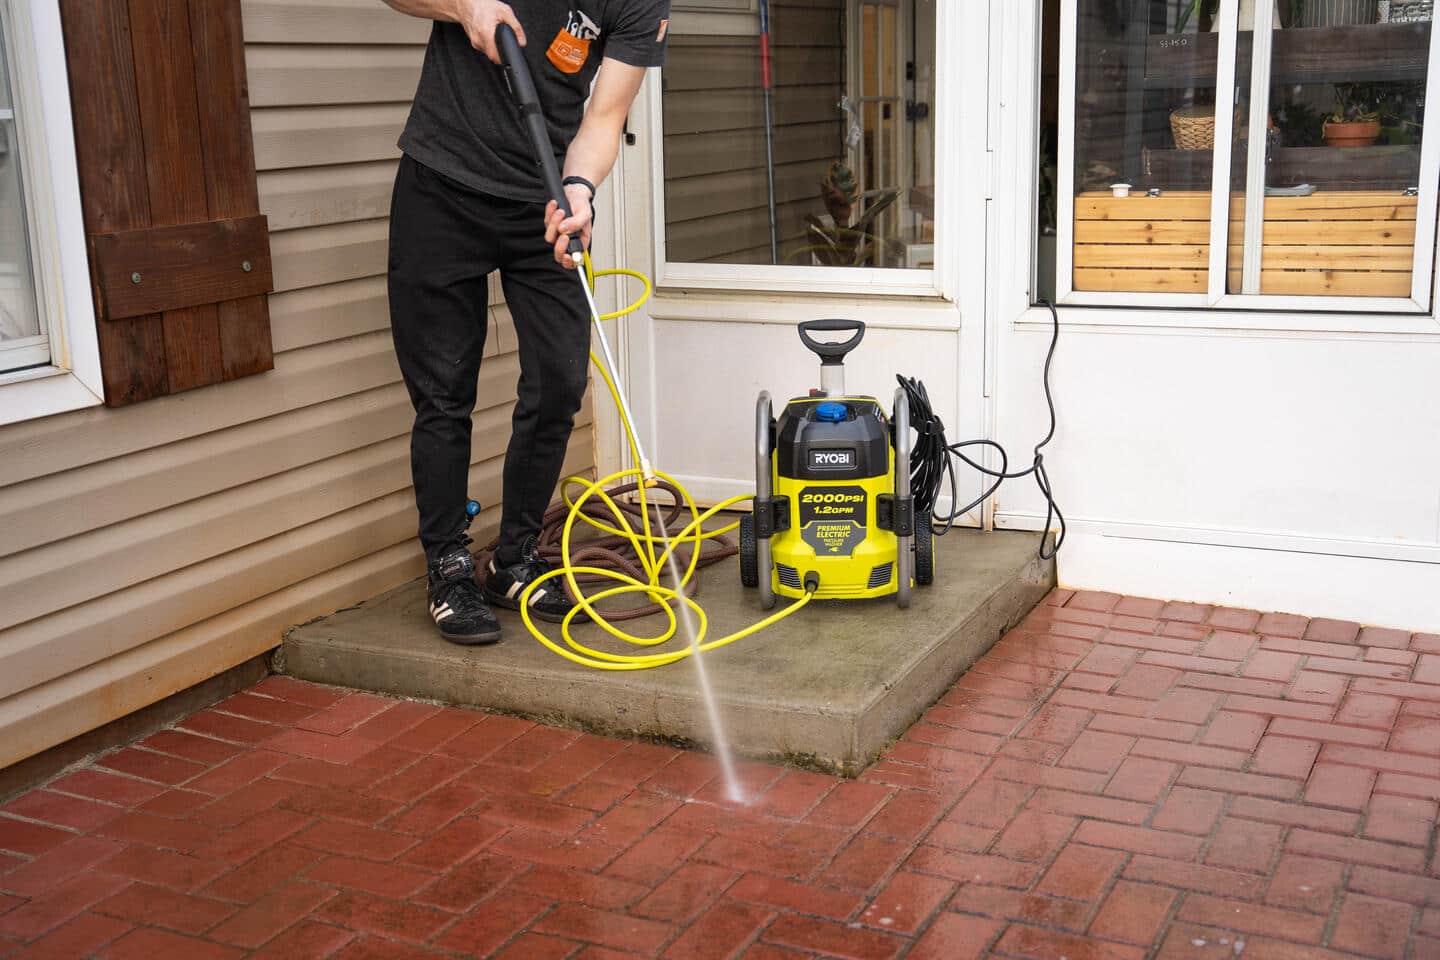 Tyson uses the powerful pressure washer to blast away dirt and mildew from the brick pavers on his back patio. 